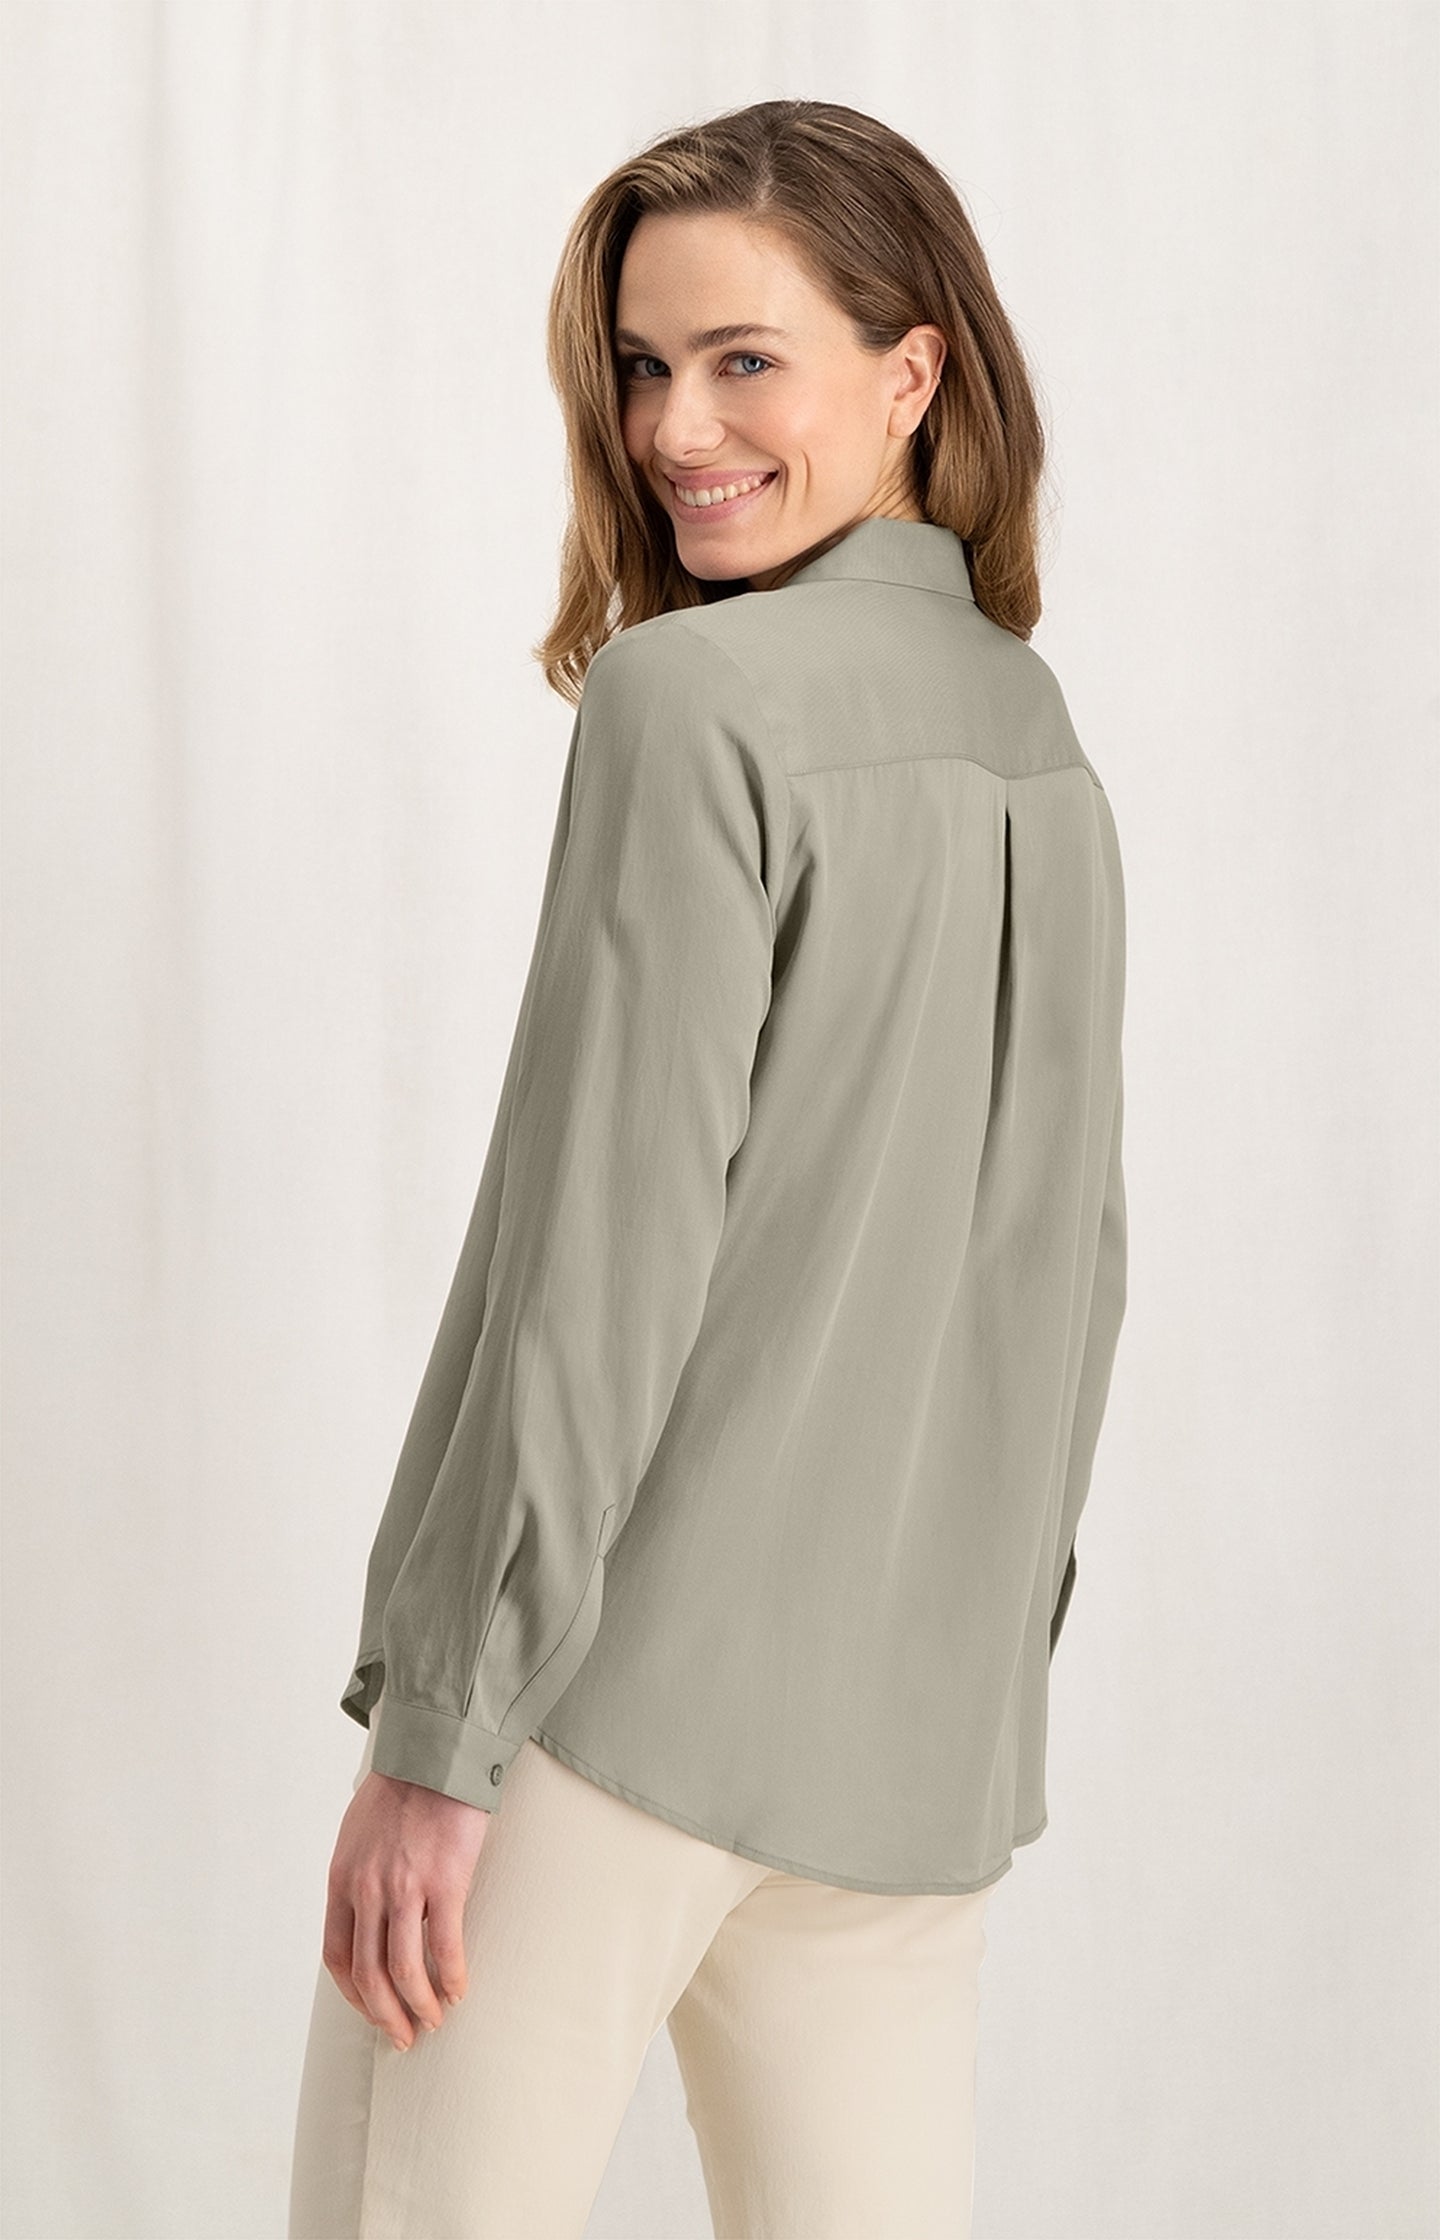 Soft poplin blouse with long sleeves, collar and buttons